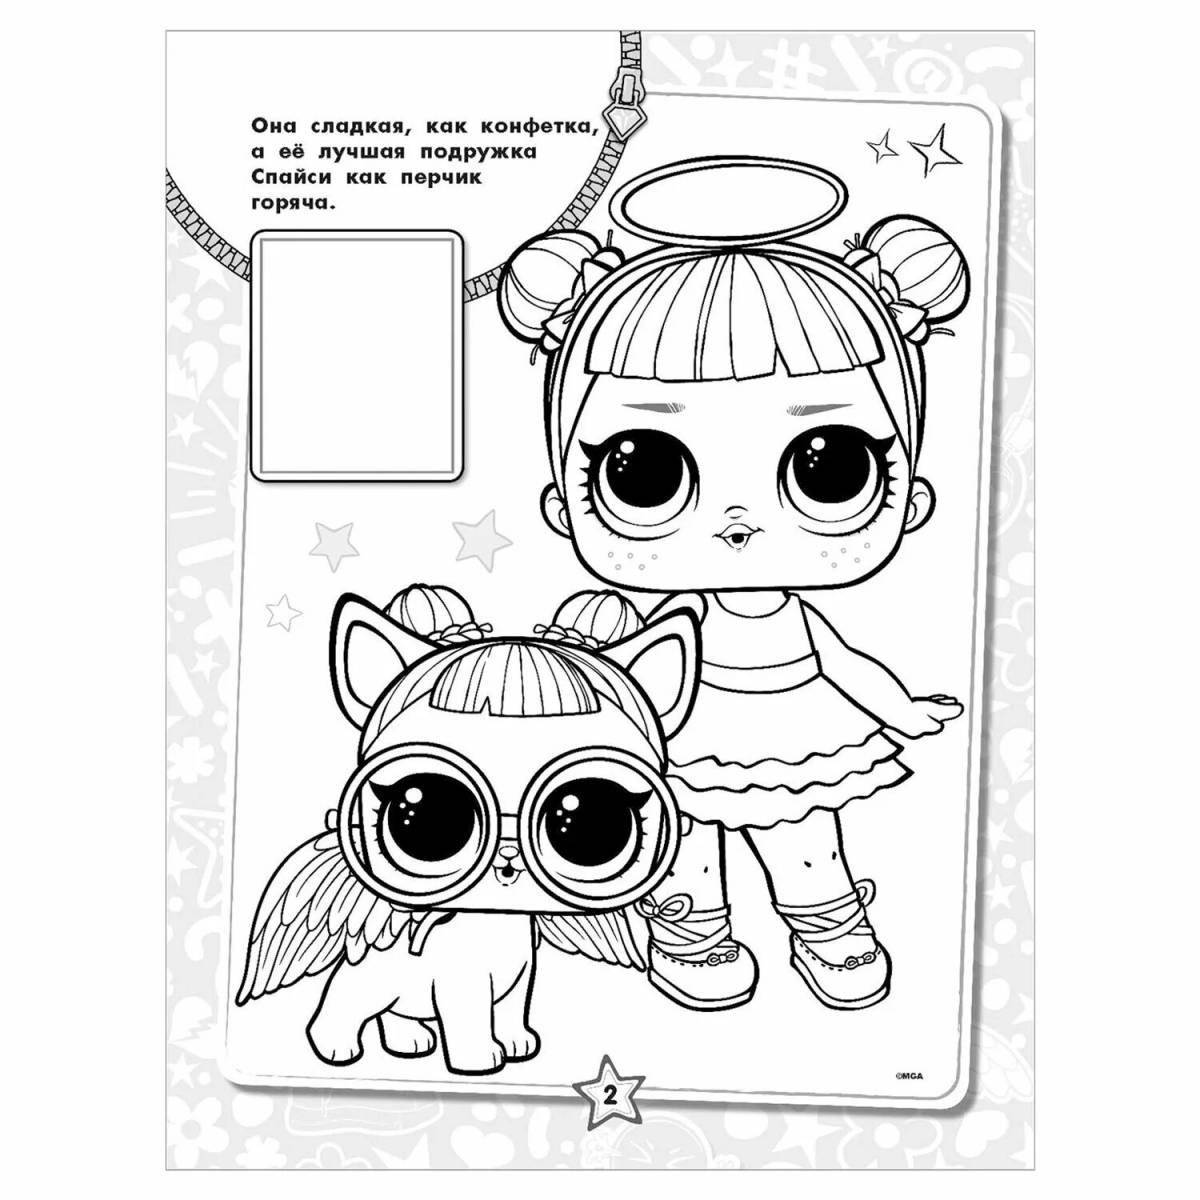 Coloring book shiny lol dollhouse for girls